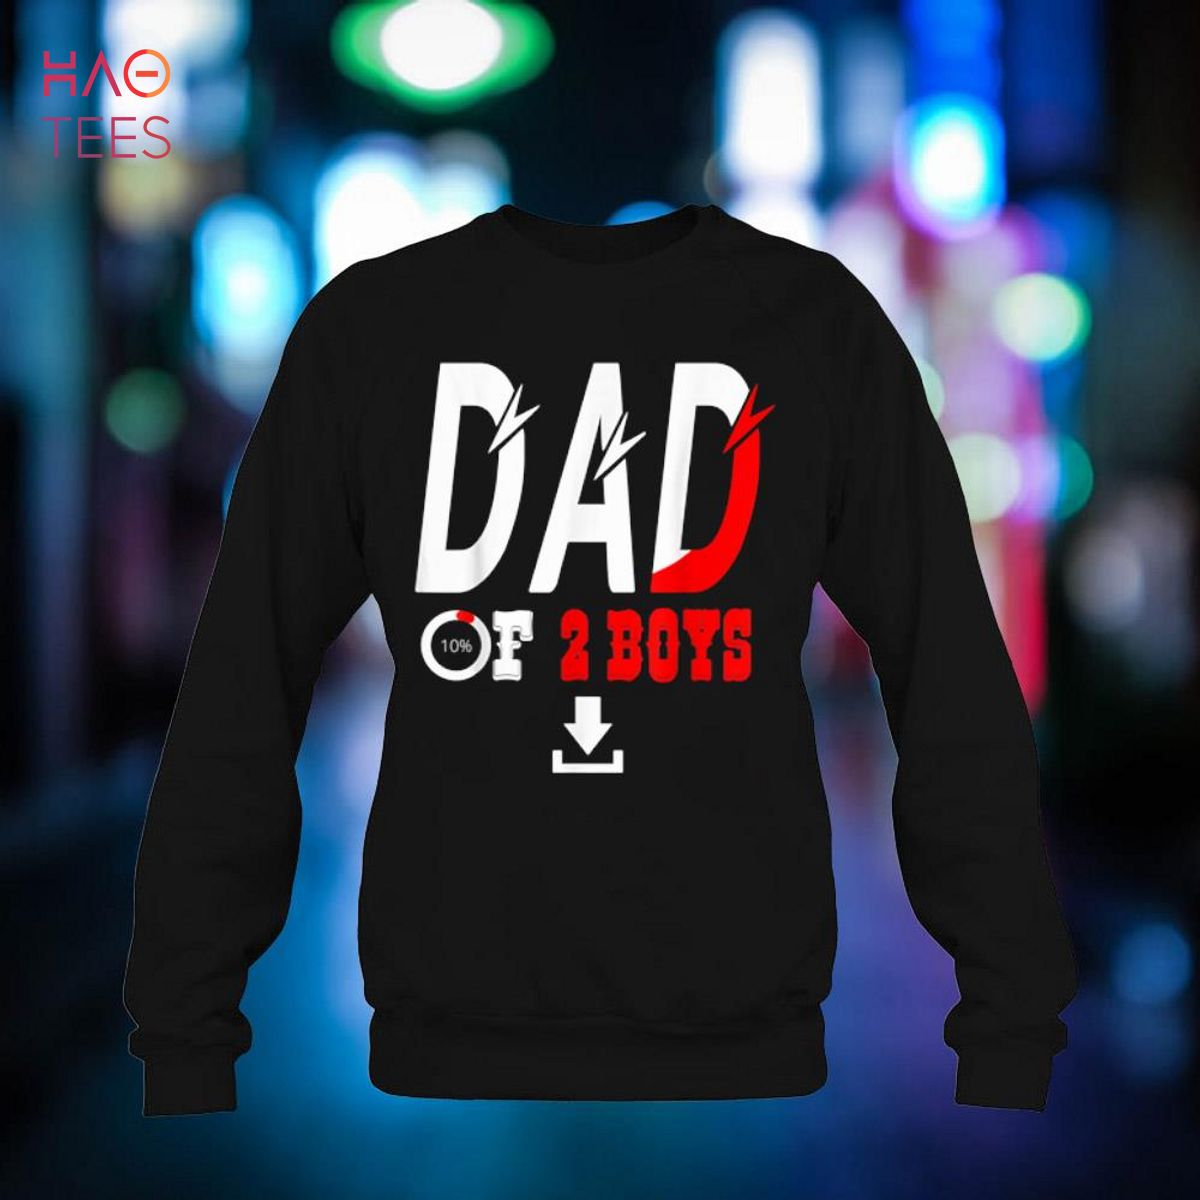 HOT Mens DAD of 2 Boys, father or grandpa of 2 kids Shirt